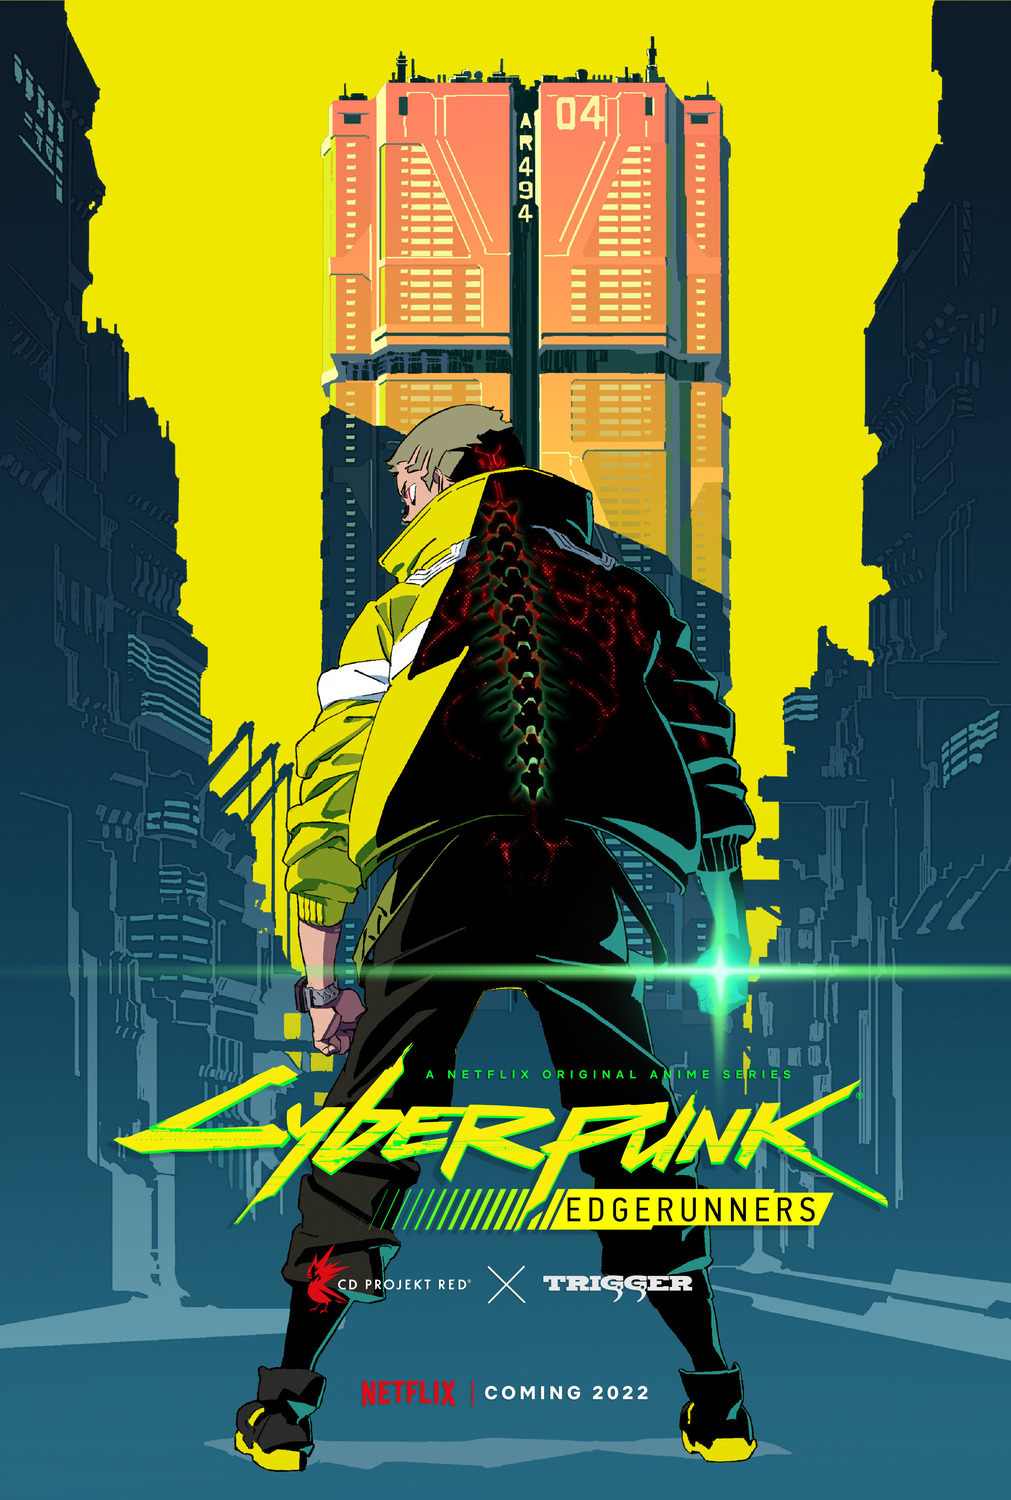 Netflix's Cyberpunk 2077 anime show Edgerunners streams into your brain  from September 13th